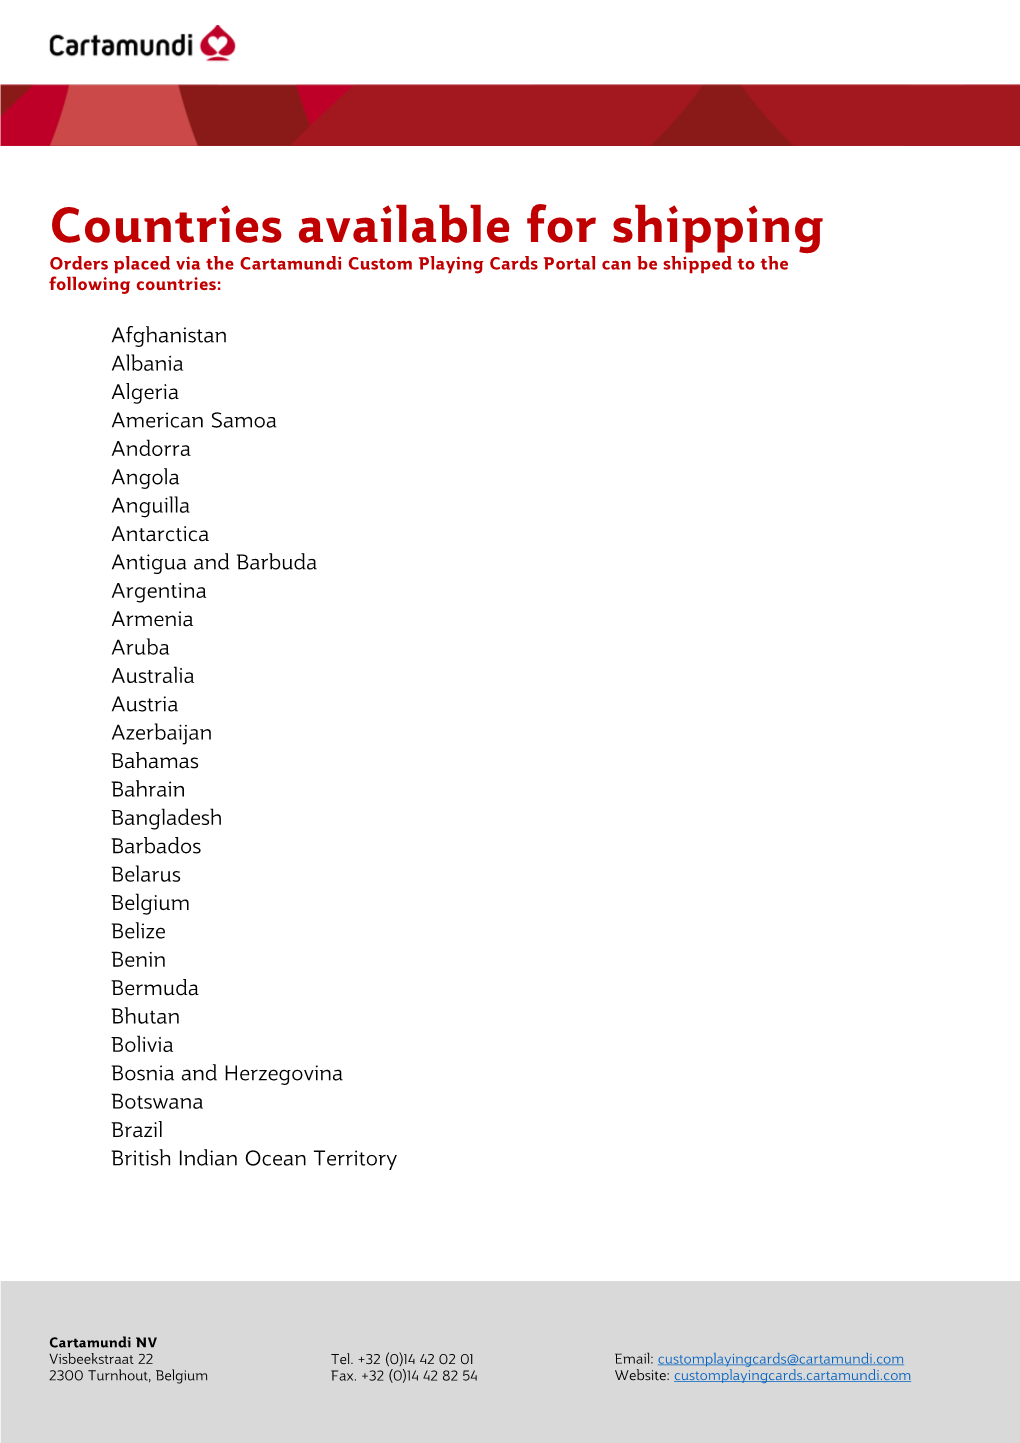 Countries Available for Shipping Orders Placed Via the Cartamundi Custom Playing Cards Portal Can Be Shipped to the Following Countries